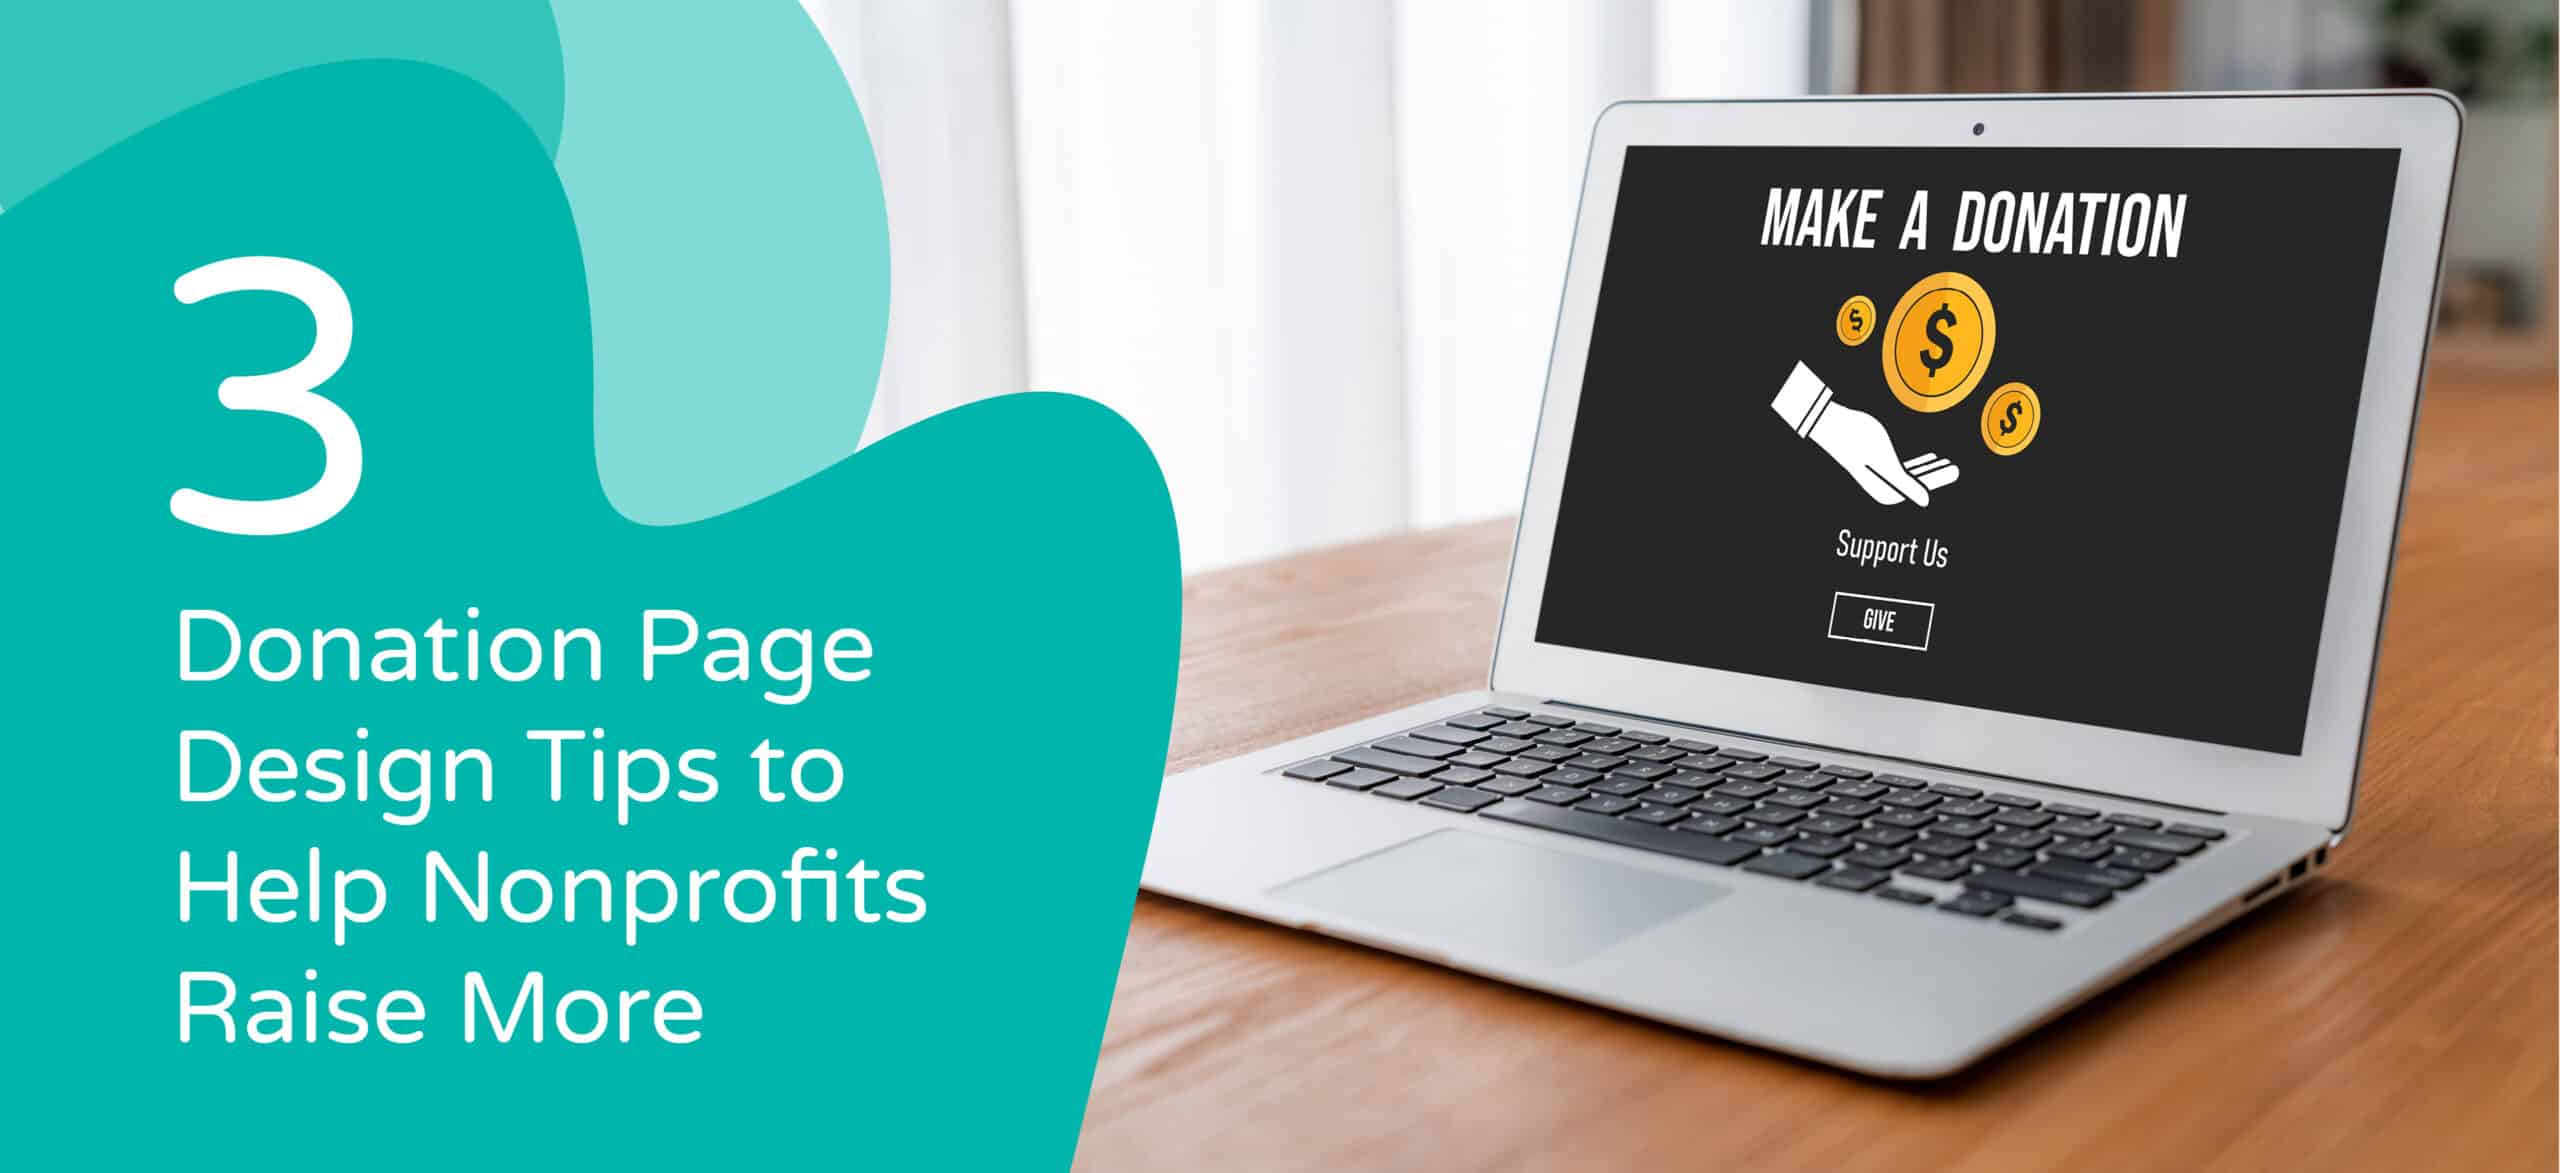 This guide will cover three donation page design tips to help your nonprofit raise more funds to support your mission.